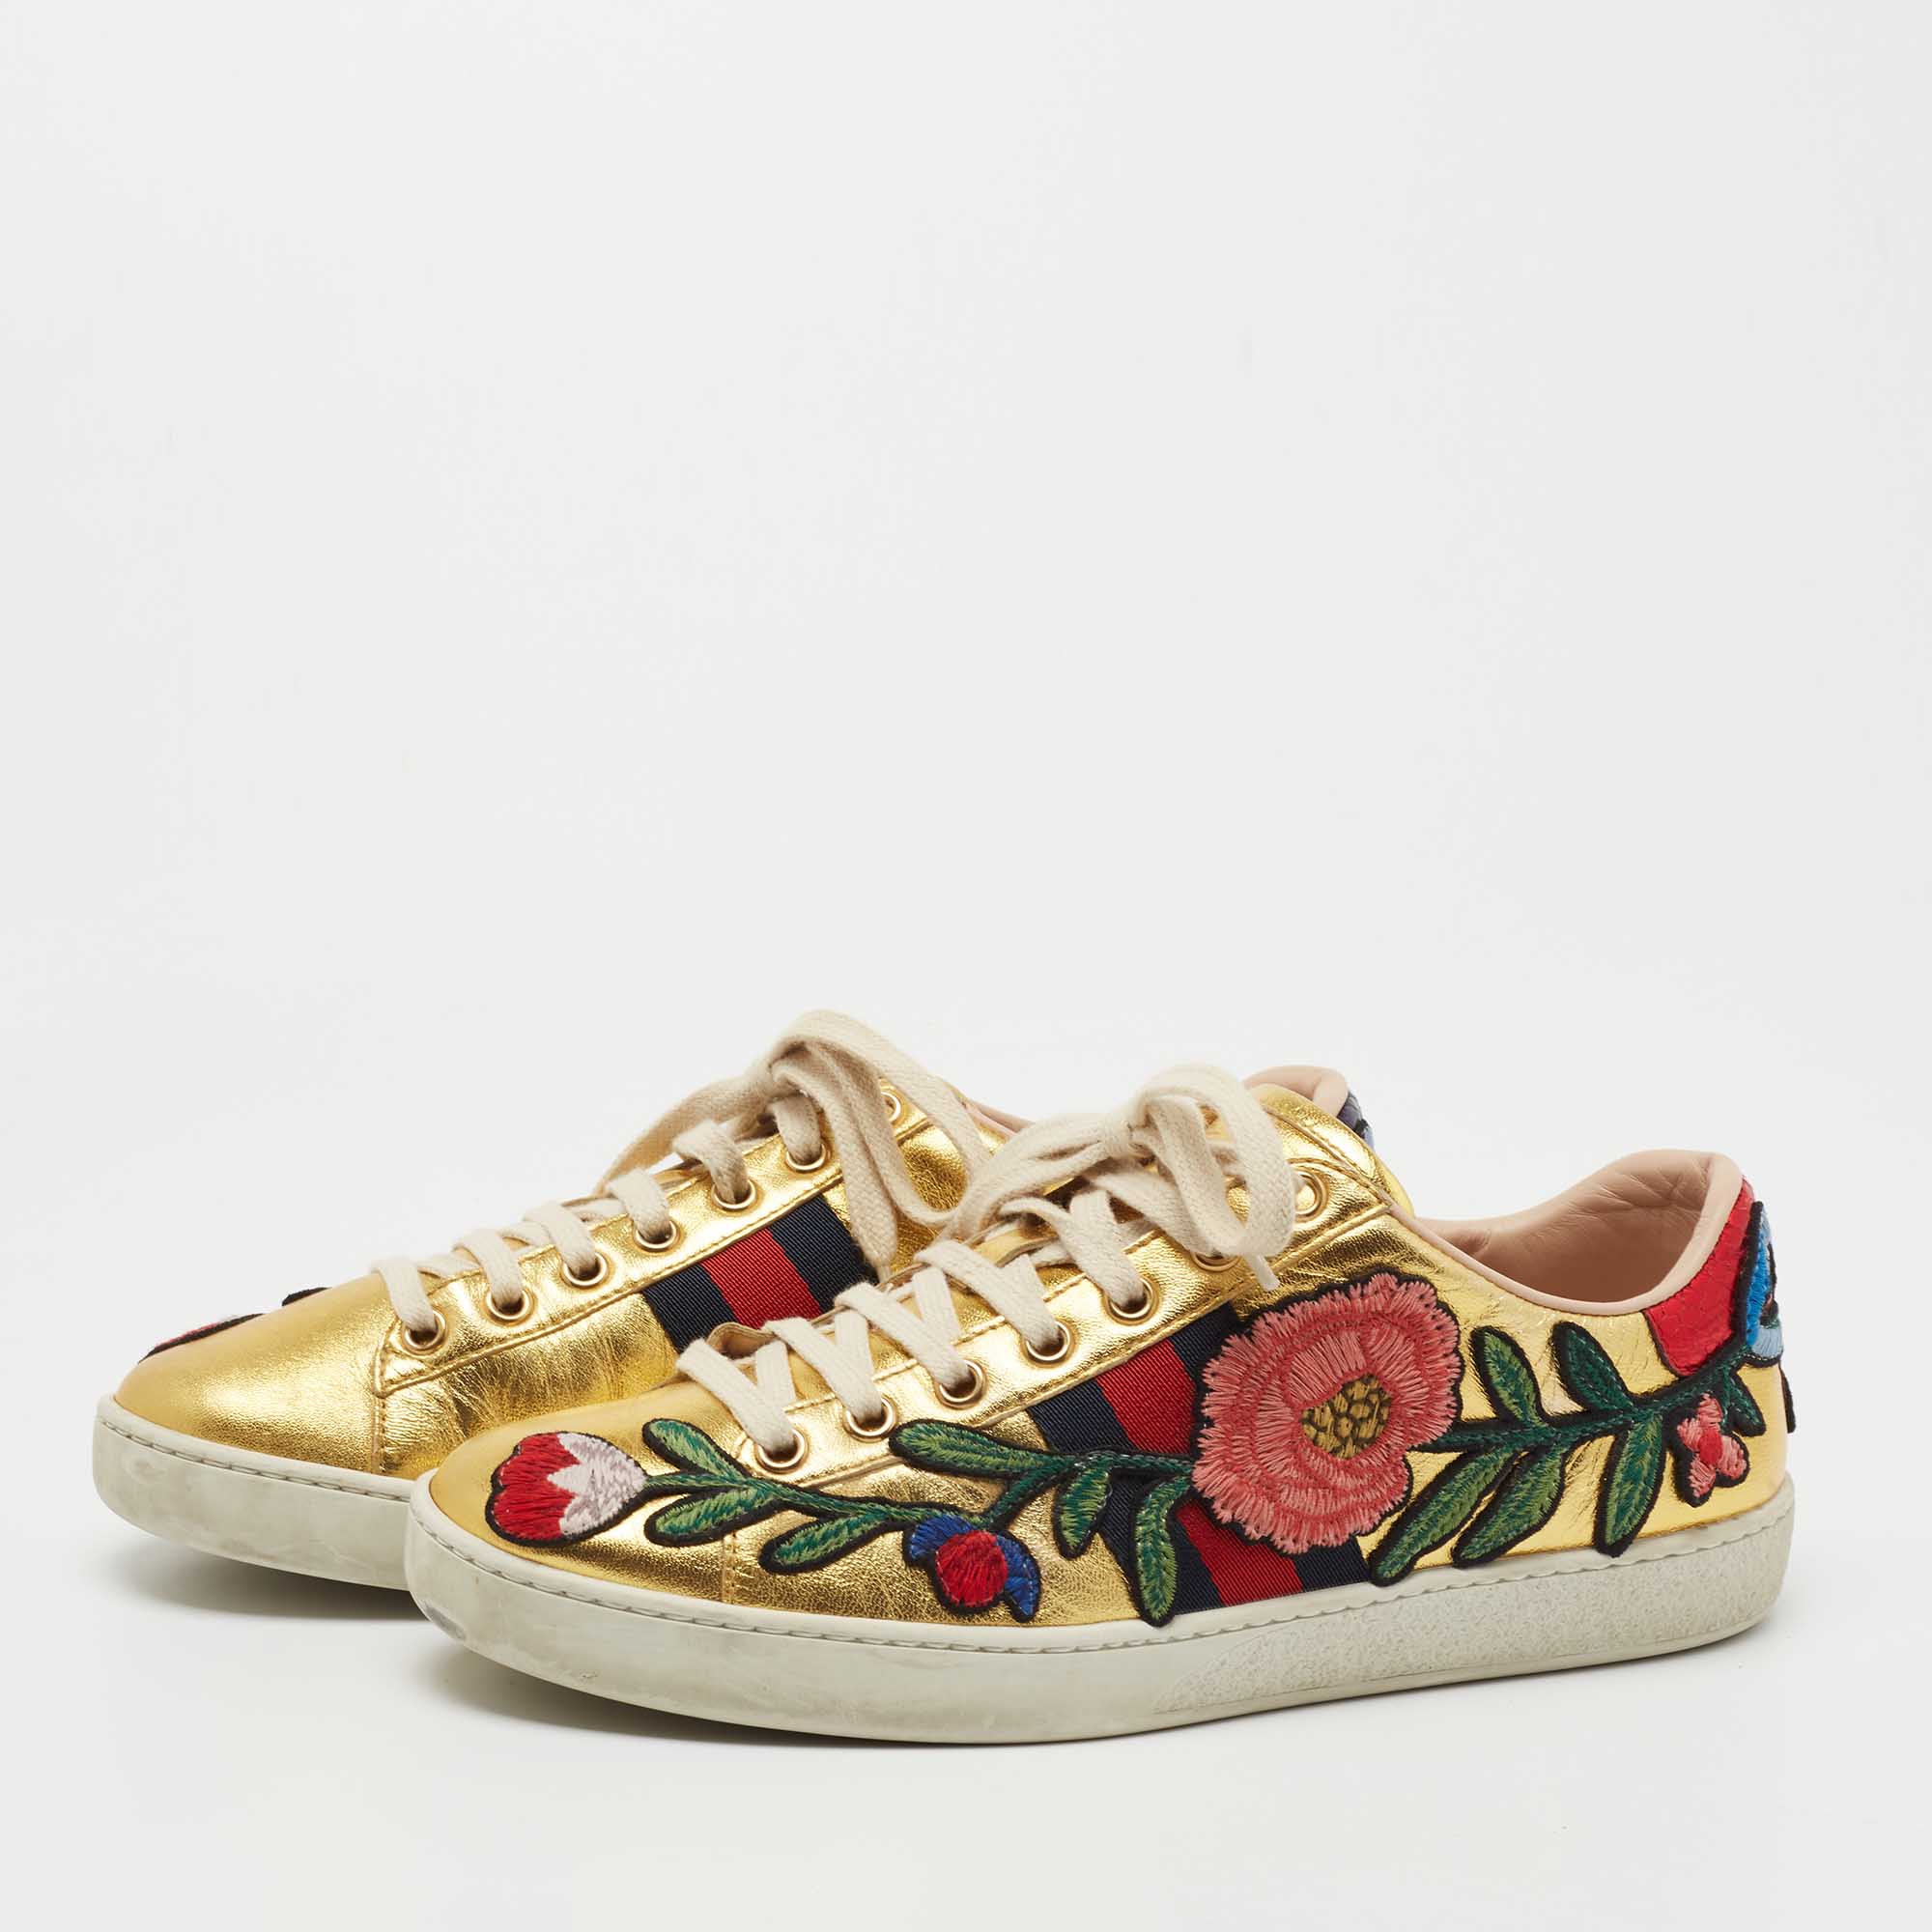 

Gucci Gold Python Embossed Leather and Leather Floral Embroidered Ace Low Top Sneakers Size